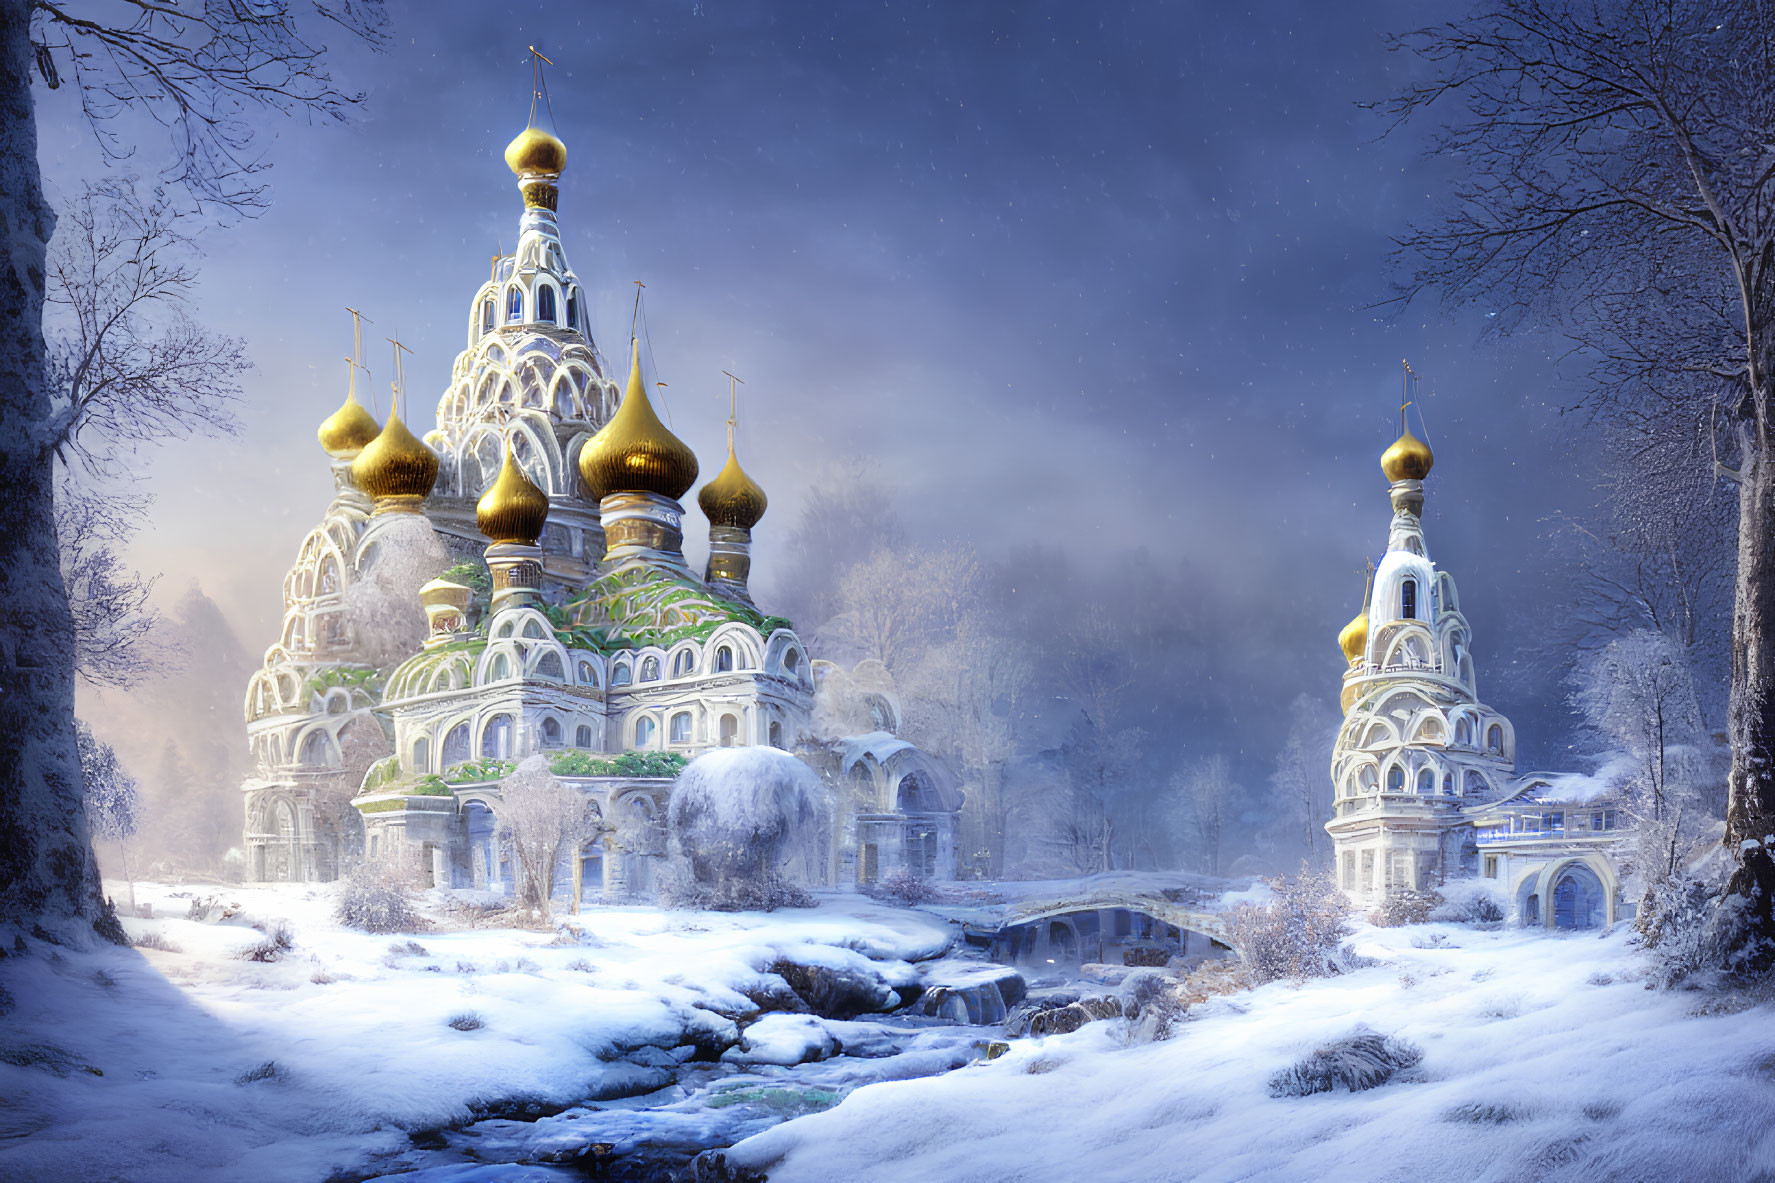 Snow-covered cathedral with onion domes in wintery forest beside stone bridge and twilight sky